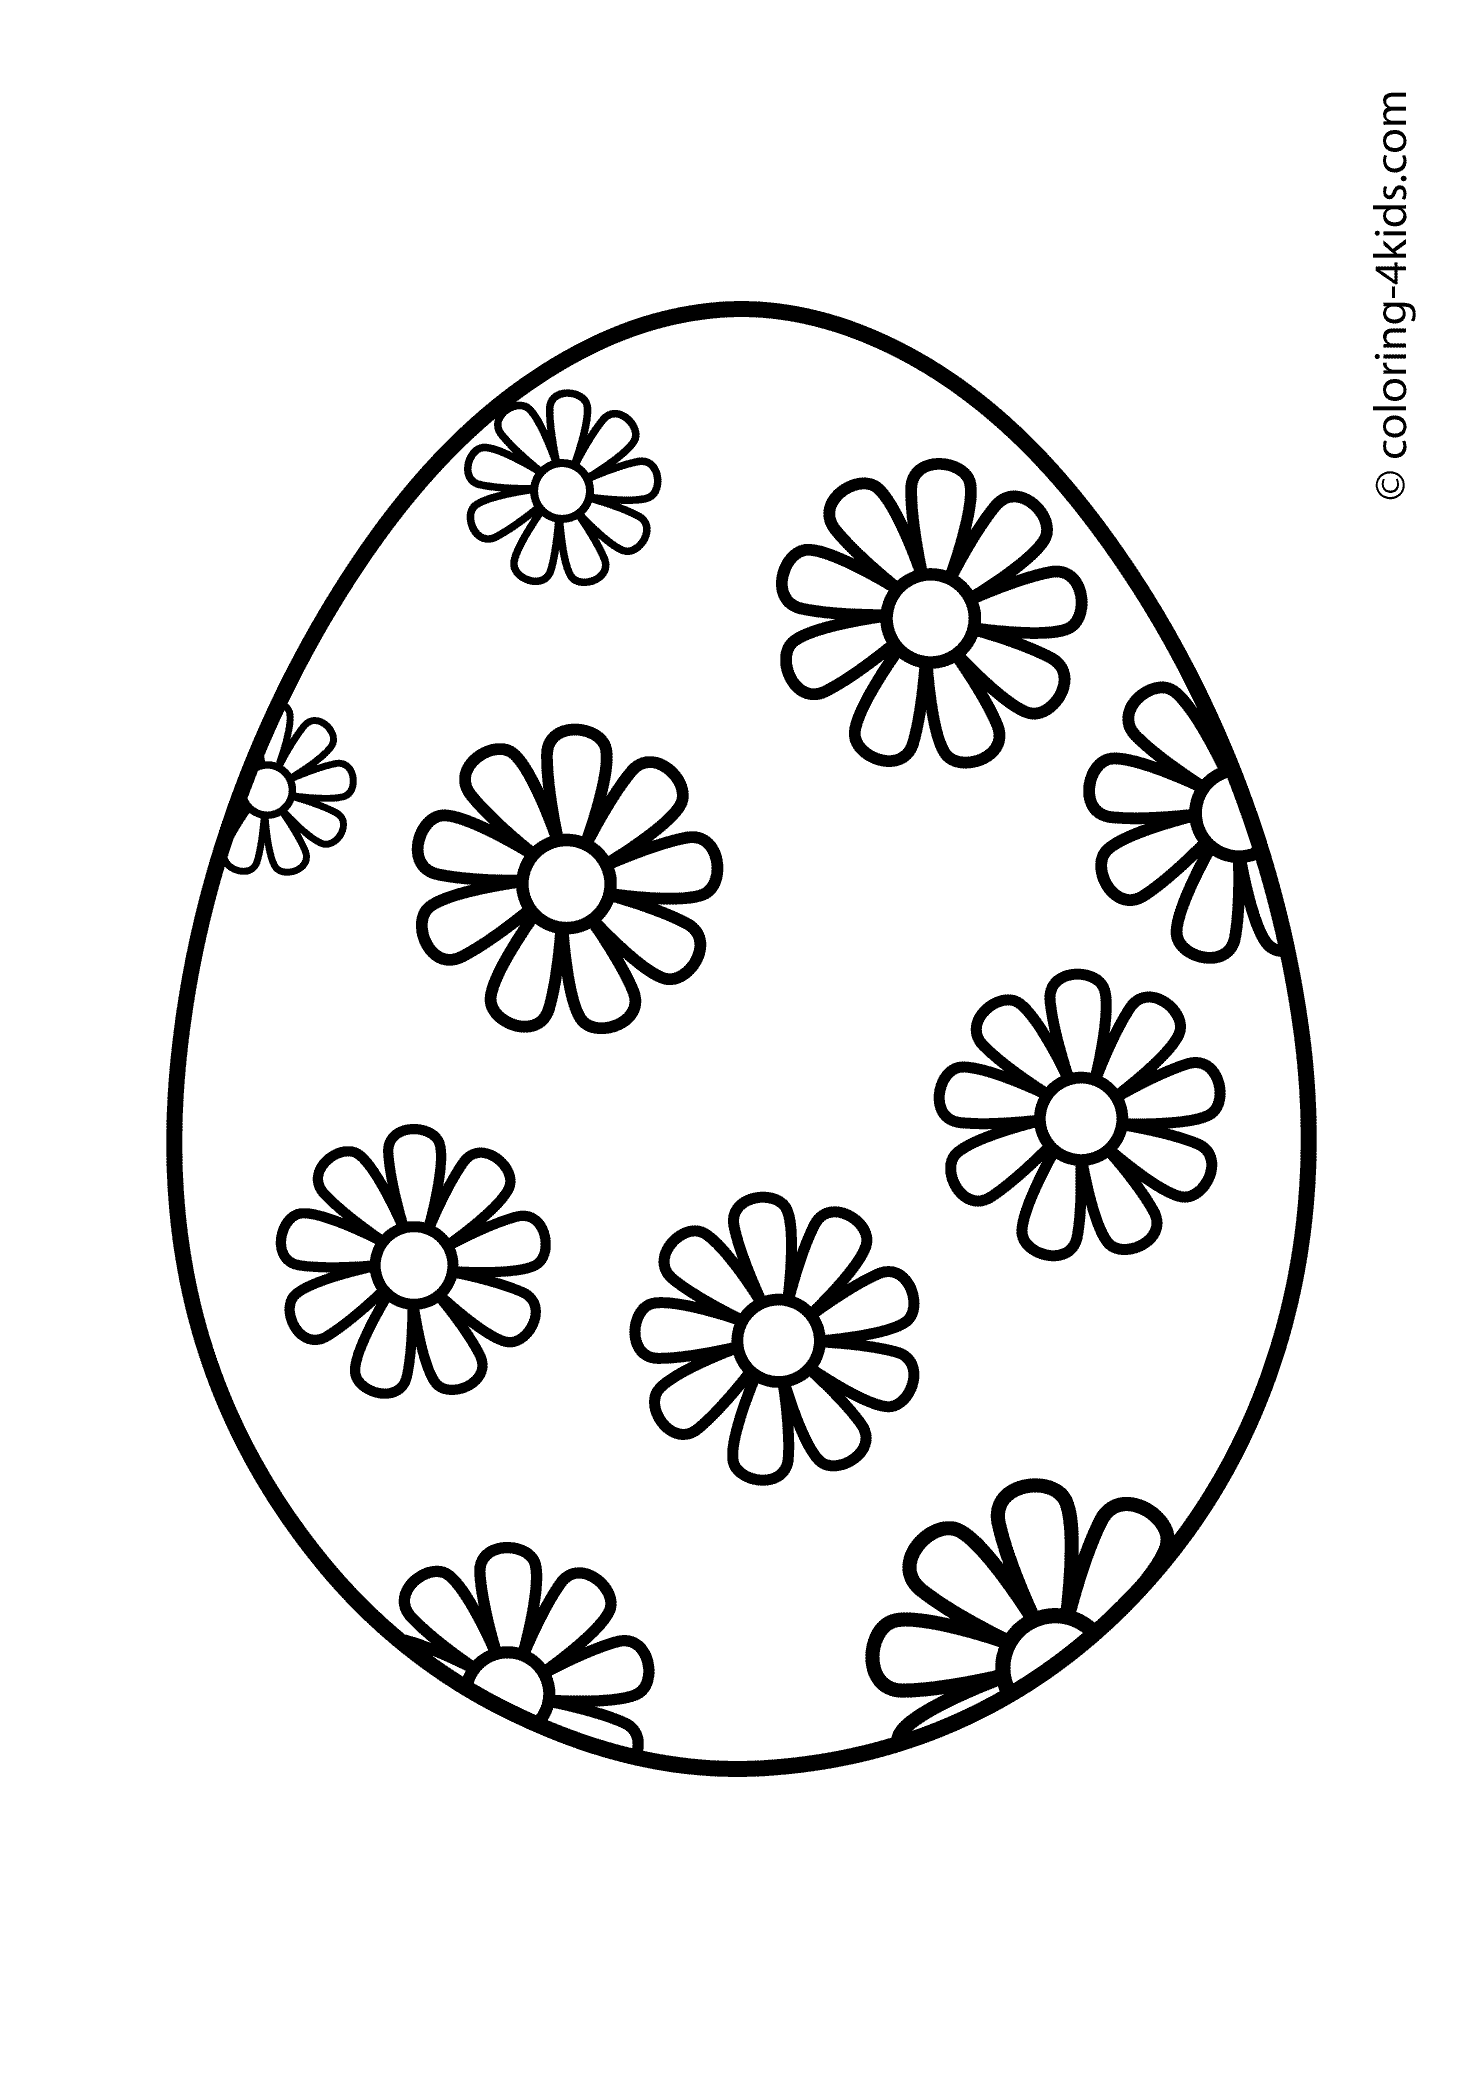 colouring picture easter egg easter coloring pages easter eggs coloring pages for kids colouring easter picture egg 